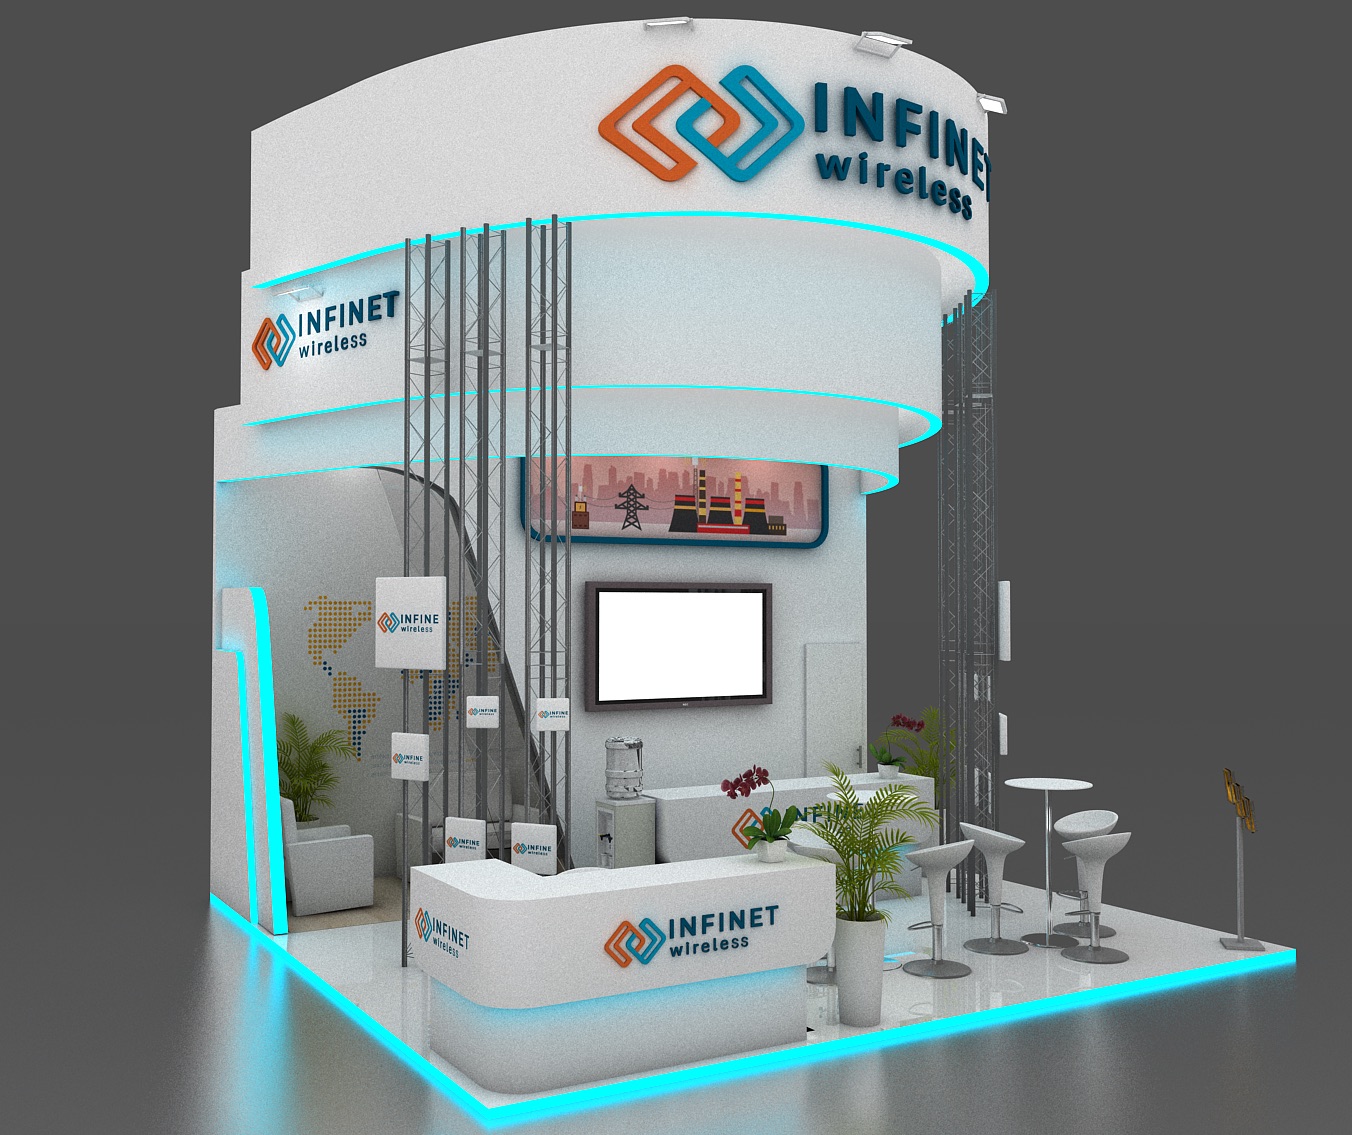 Infinet Wireless' Stand at Mobile World Congress 2020